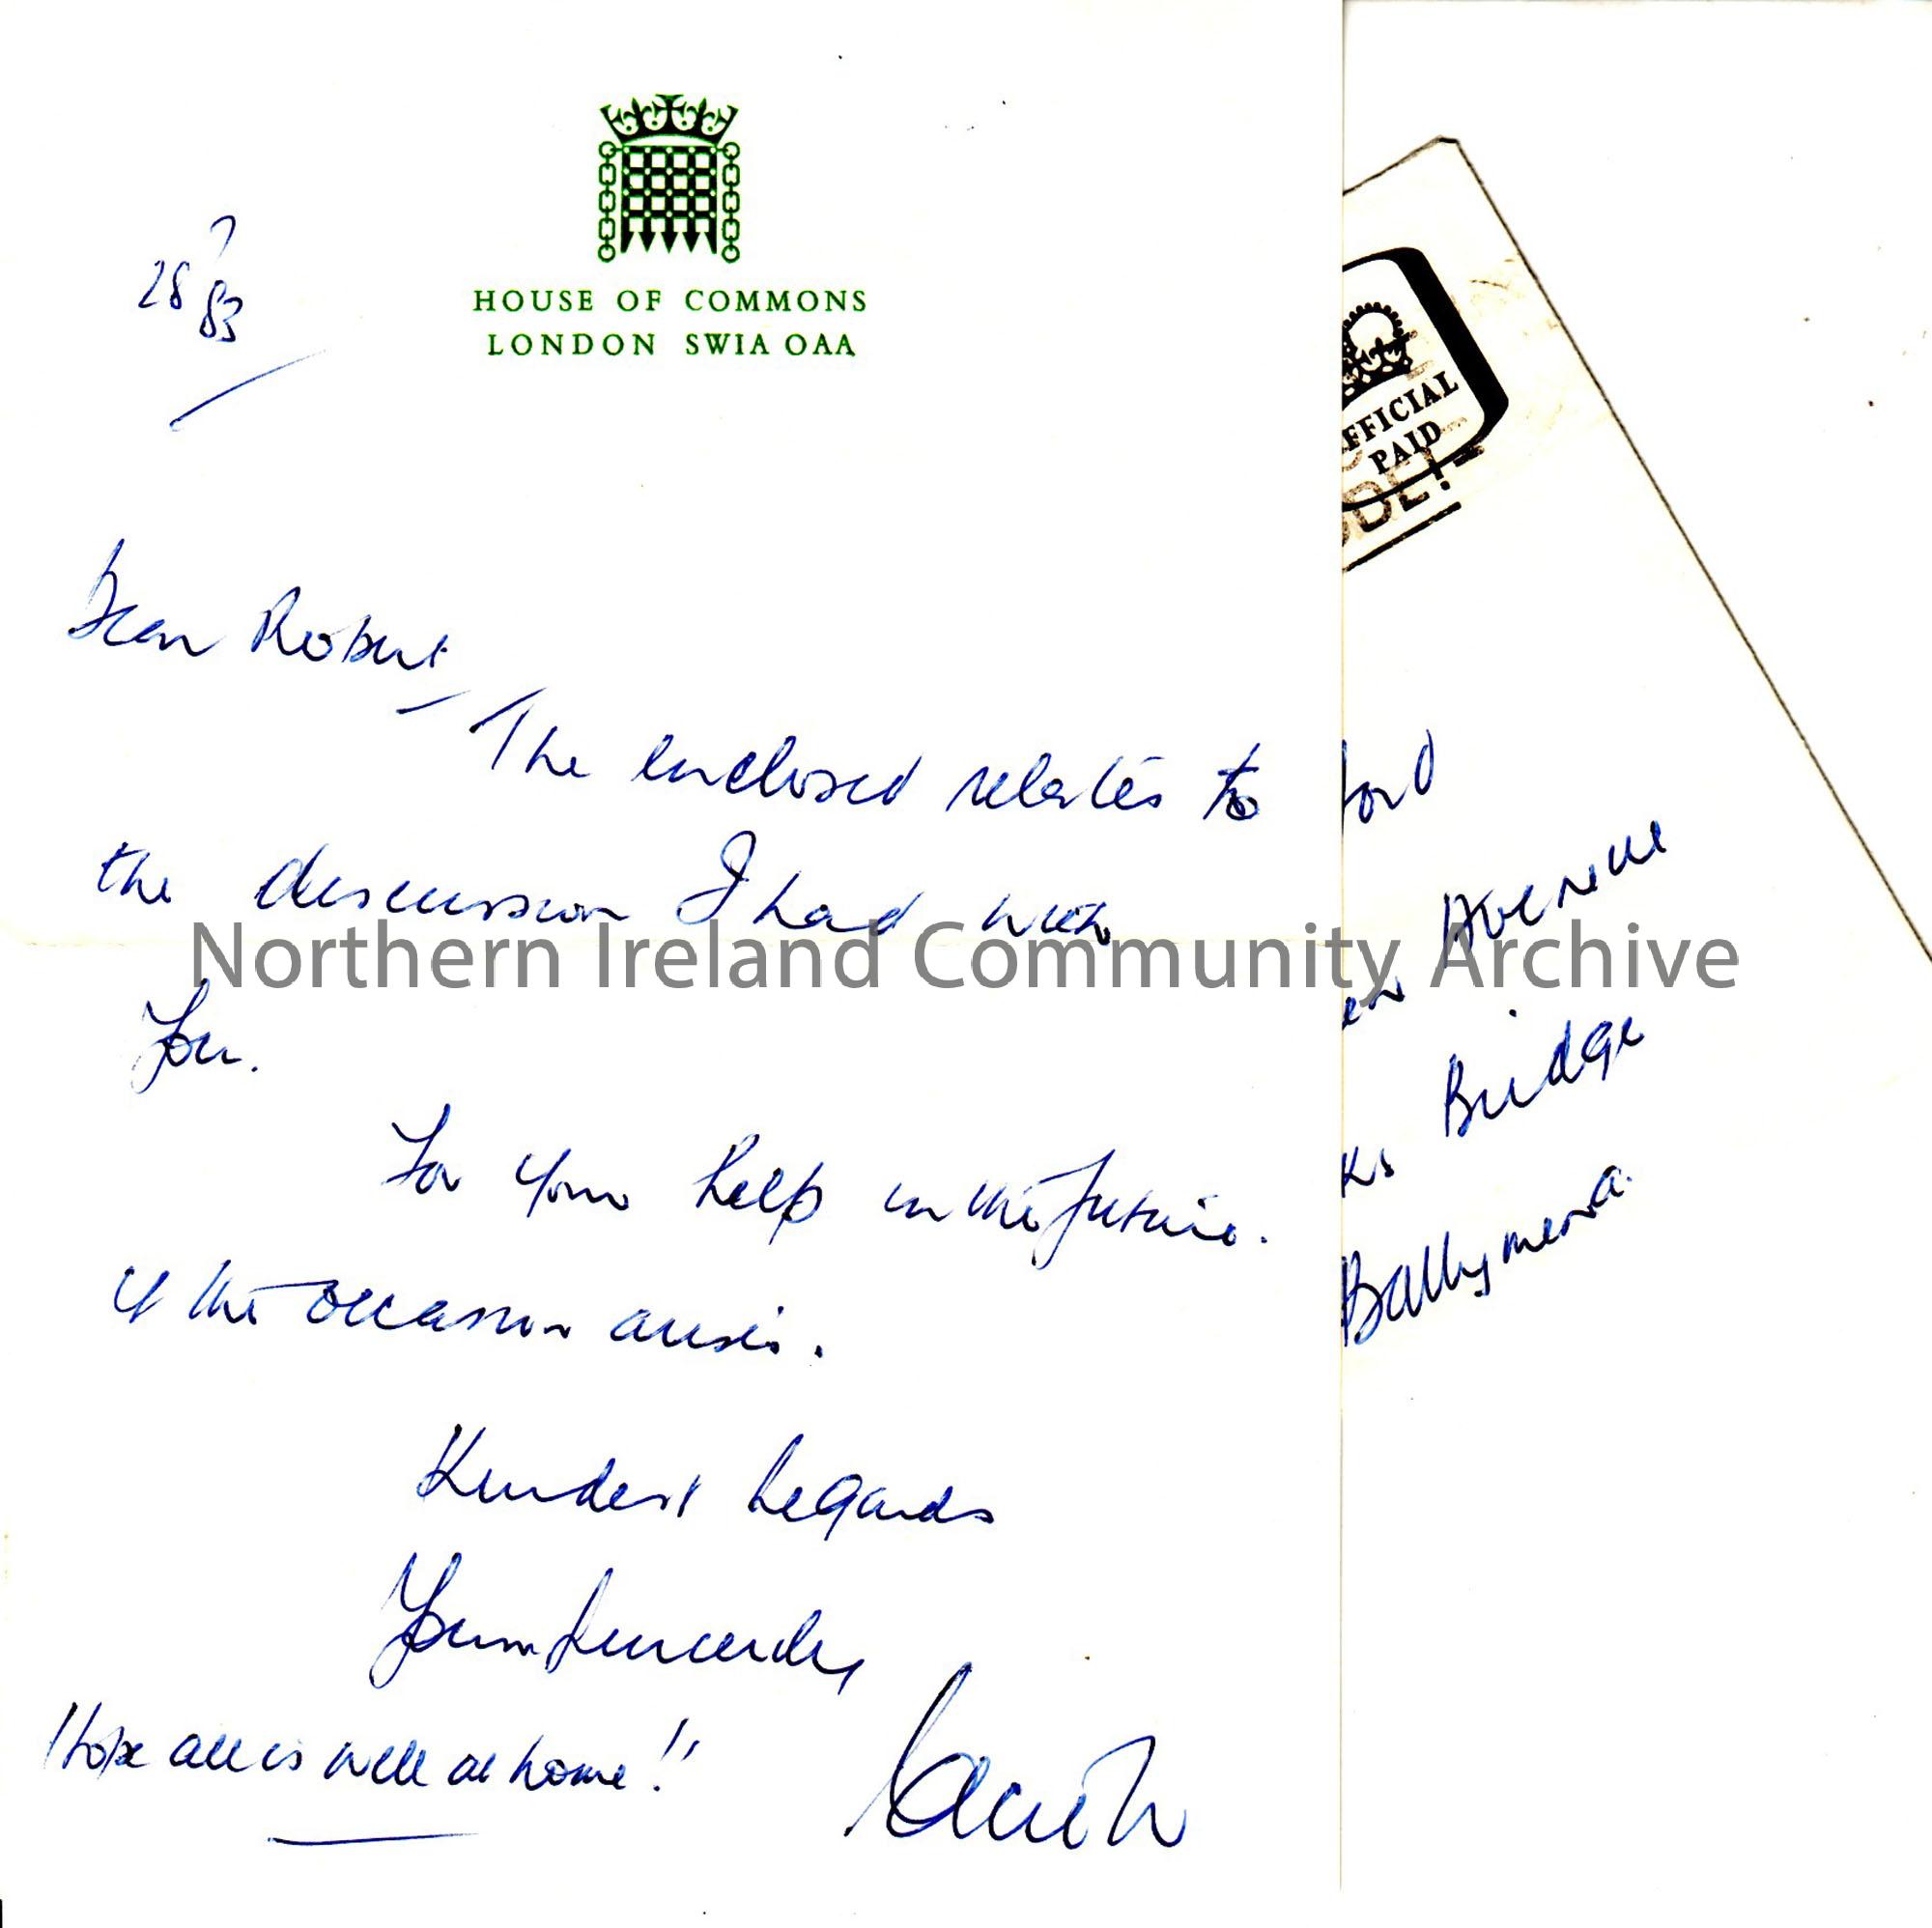 Letter from House of Commons MP for North Belfast Cecil Walker, to Robert Bashford, 28th July 1983. According to the donor the letter refers to a disc…